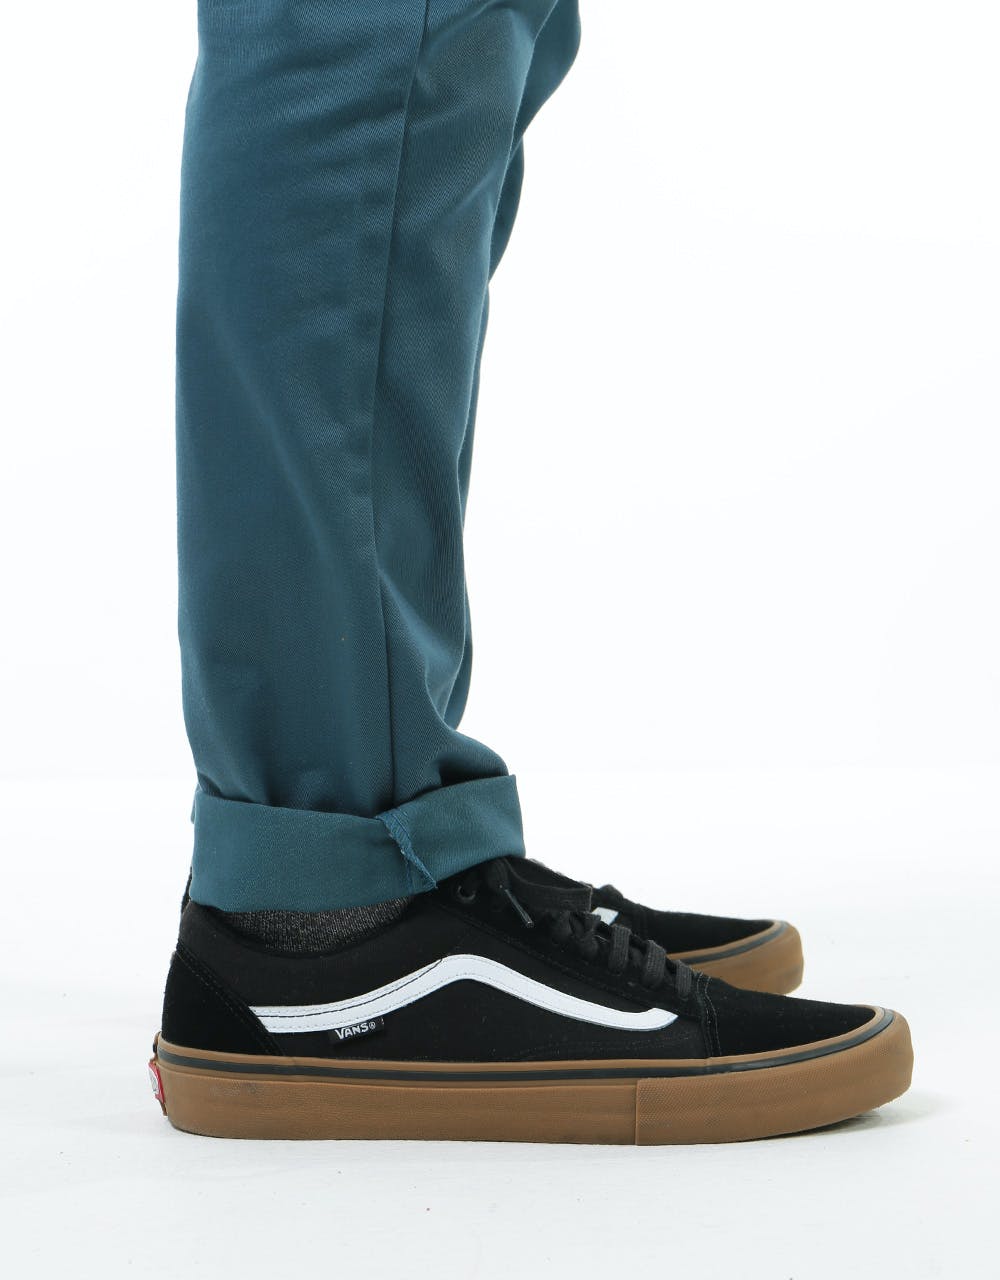 Vans Authentic Chino Stretch Trousers - Stargazer